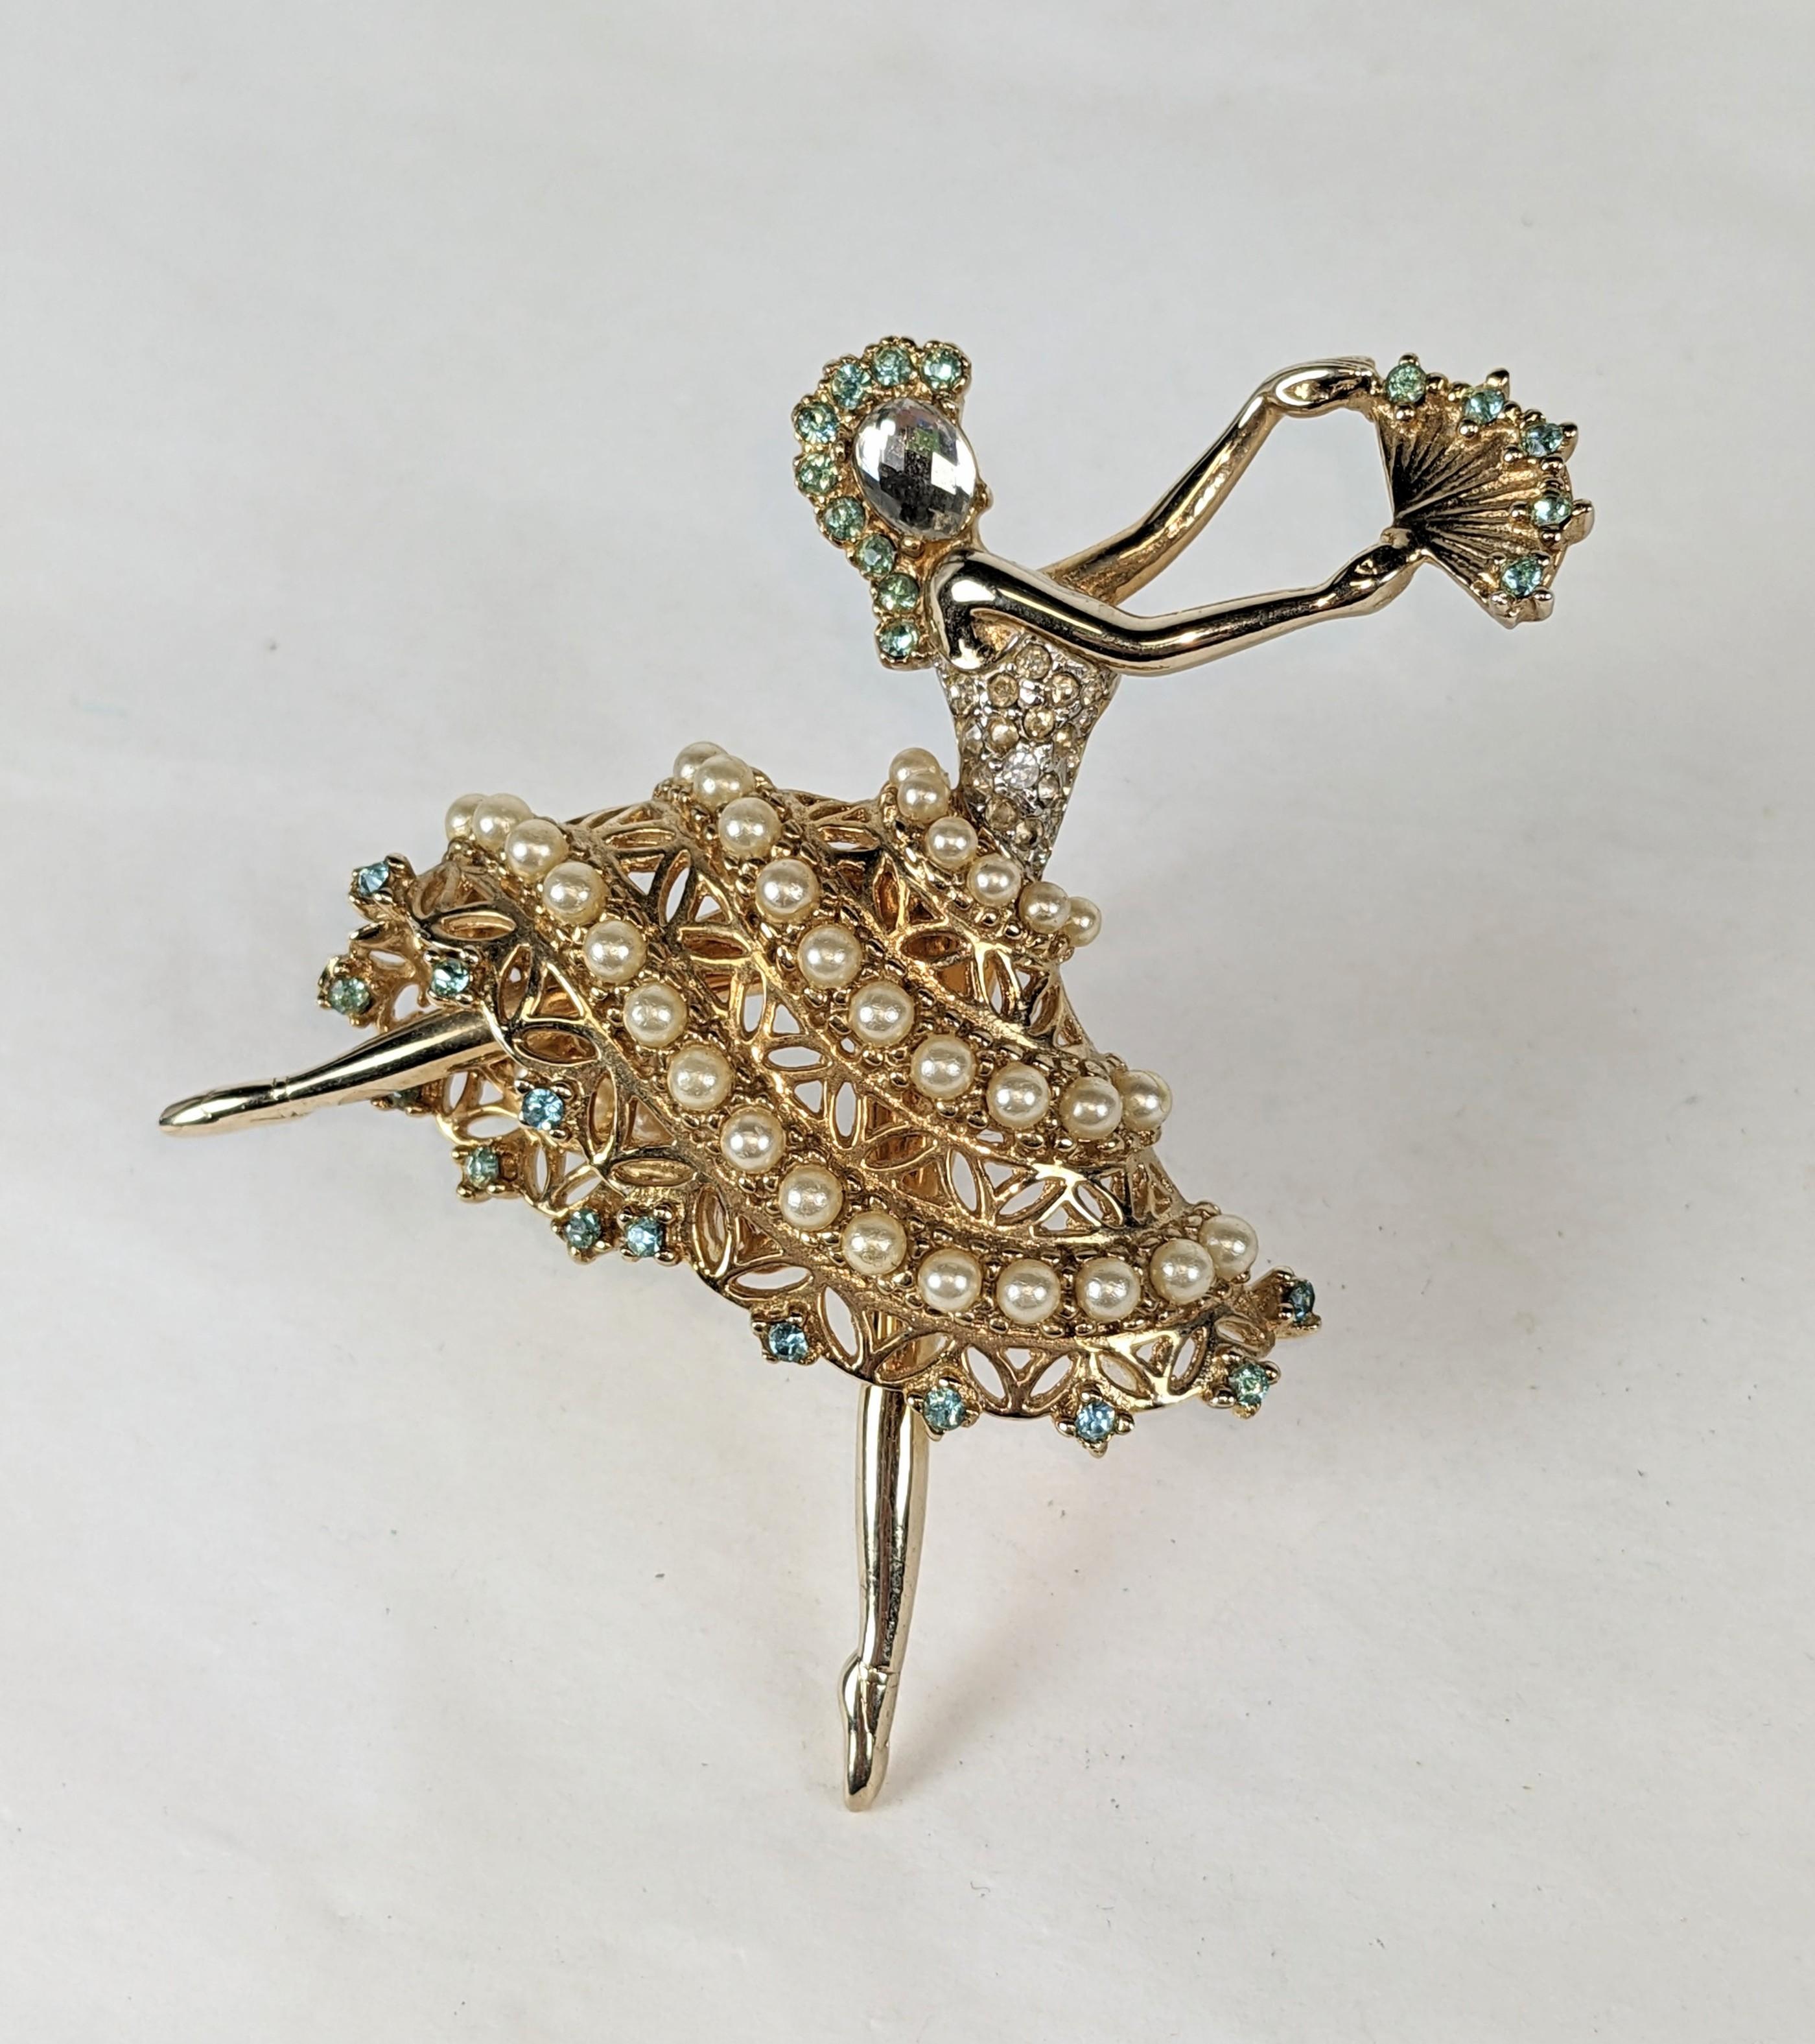 Charming Coro Pearl Studded Ballerina Brooch from the 1930's. Done in the Van Cleef style with a faux pearl and paste studded skirt with a rose cut 